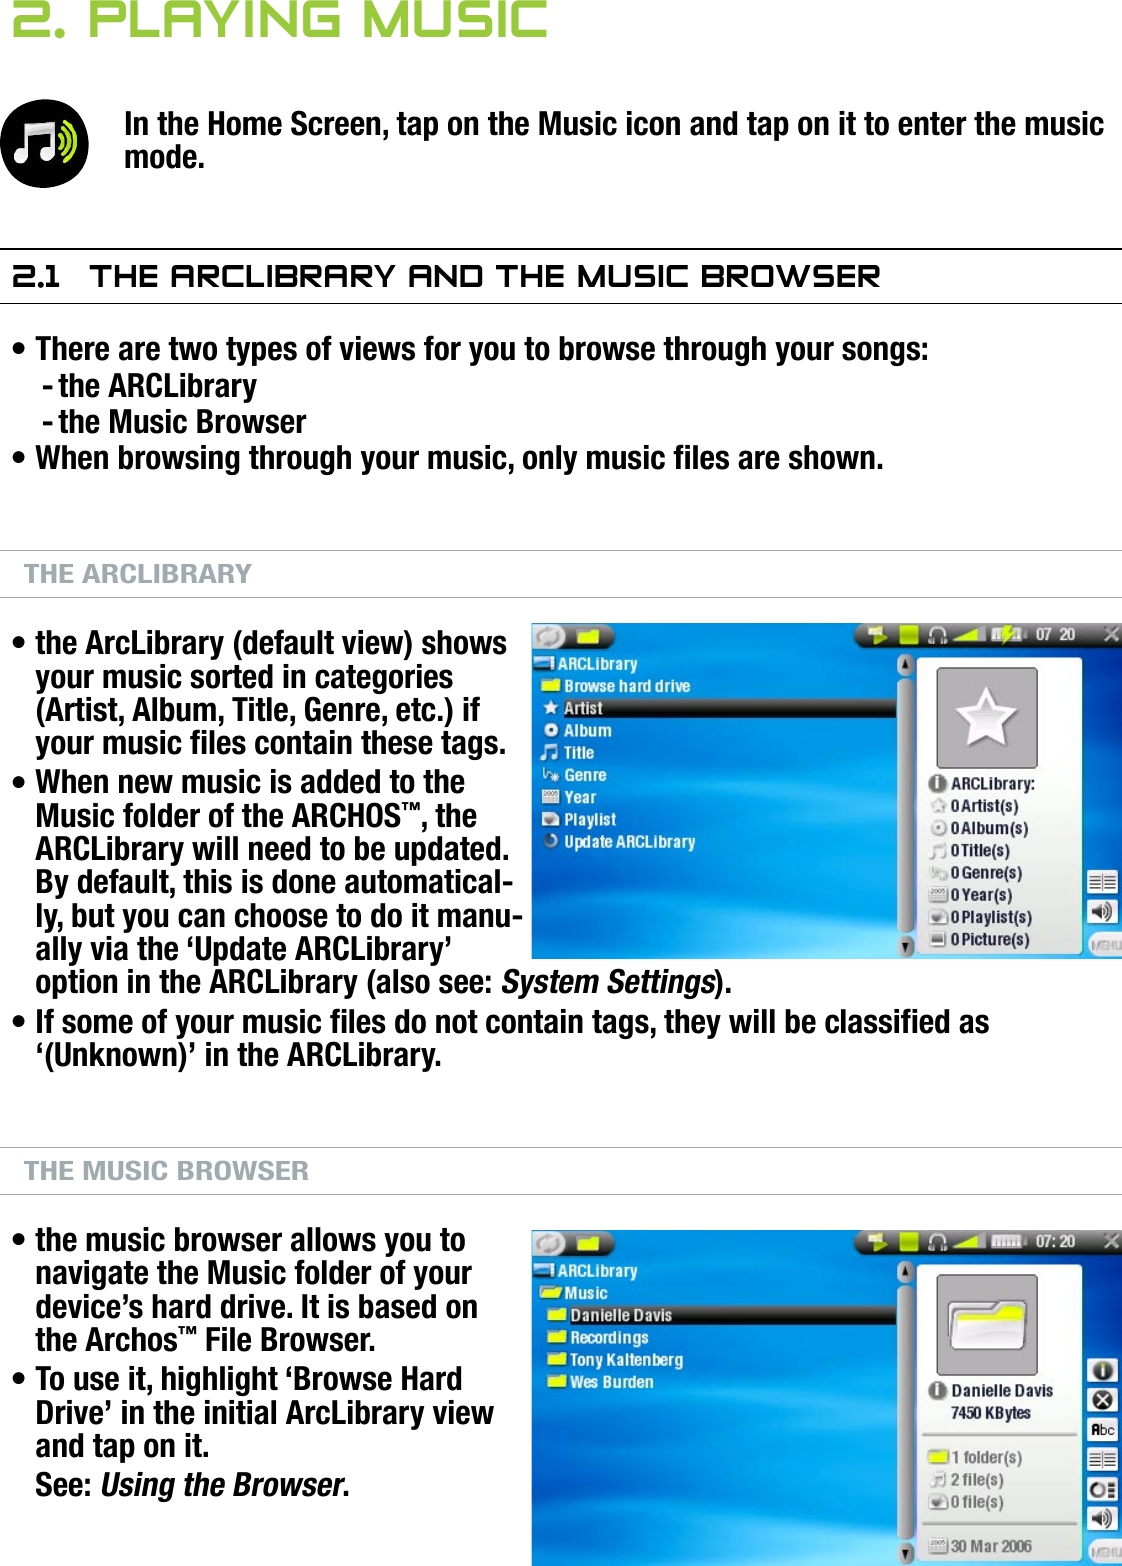 704MANUAL V0.0PLAYING MUSIC   &gt;   p. 142. Playing MusiCIn the Home Screen, tap on the Music icon and tap on it to enter the music mode.2.1  The arClibrary and The MusiC brOwserThere are two types of views for you to browse through your songs:the ARCLibrarythe Music BrowserWhen browsing through your music, only music les are shown.THE ARCLIBRARYthe ArcLibrary (default view) shows your music sorted in categories (Artist, Album, Title, Genre, etc.) if your music les contain these tags.When new music is added to the Music folder of the ARCHOS™, the ARCLibrary will need to be updated. By default, this is done automatical-ly, but you can choose to do it manu-ally via the ‘Update ARCLibrary’ option in the ARCLibrary (also see: System Settings).If some of your music les do not contain tags, they will be classied as ‘(Unknown)’ in the ARCLibrary.THE MUSIC BROWSERthe music browser allows you to navigate the Music folder of your device’s hard drive. It is based on the Archos™ File Browser.To use it, highlight ‘Browse Hard Drive’ in the initial ArcLibrary view and tap on it.See: Using the Browser.•--••••••